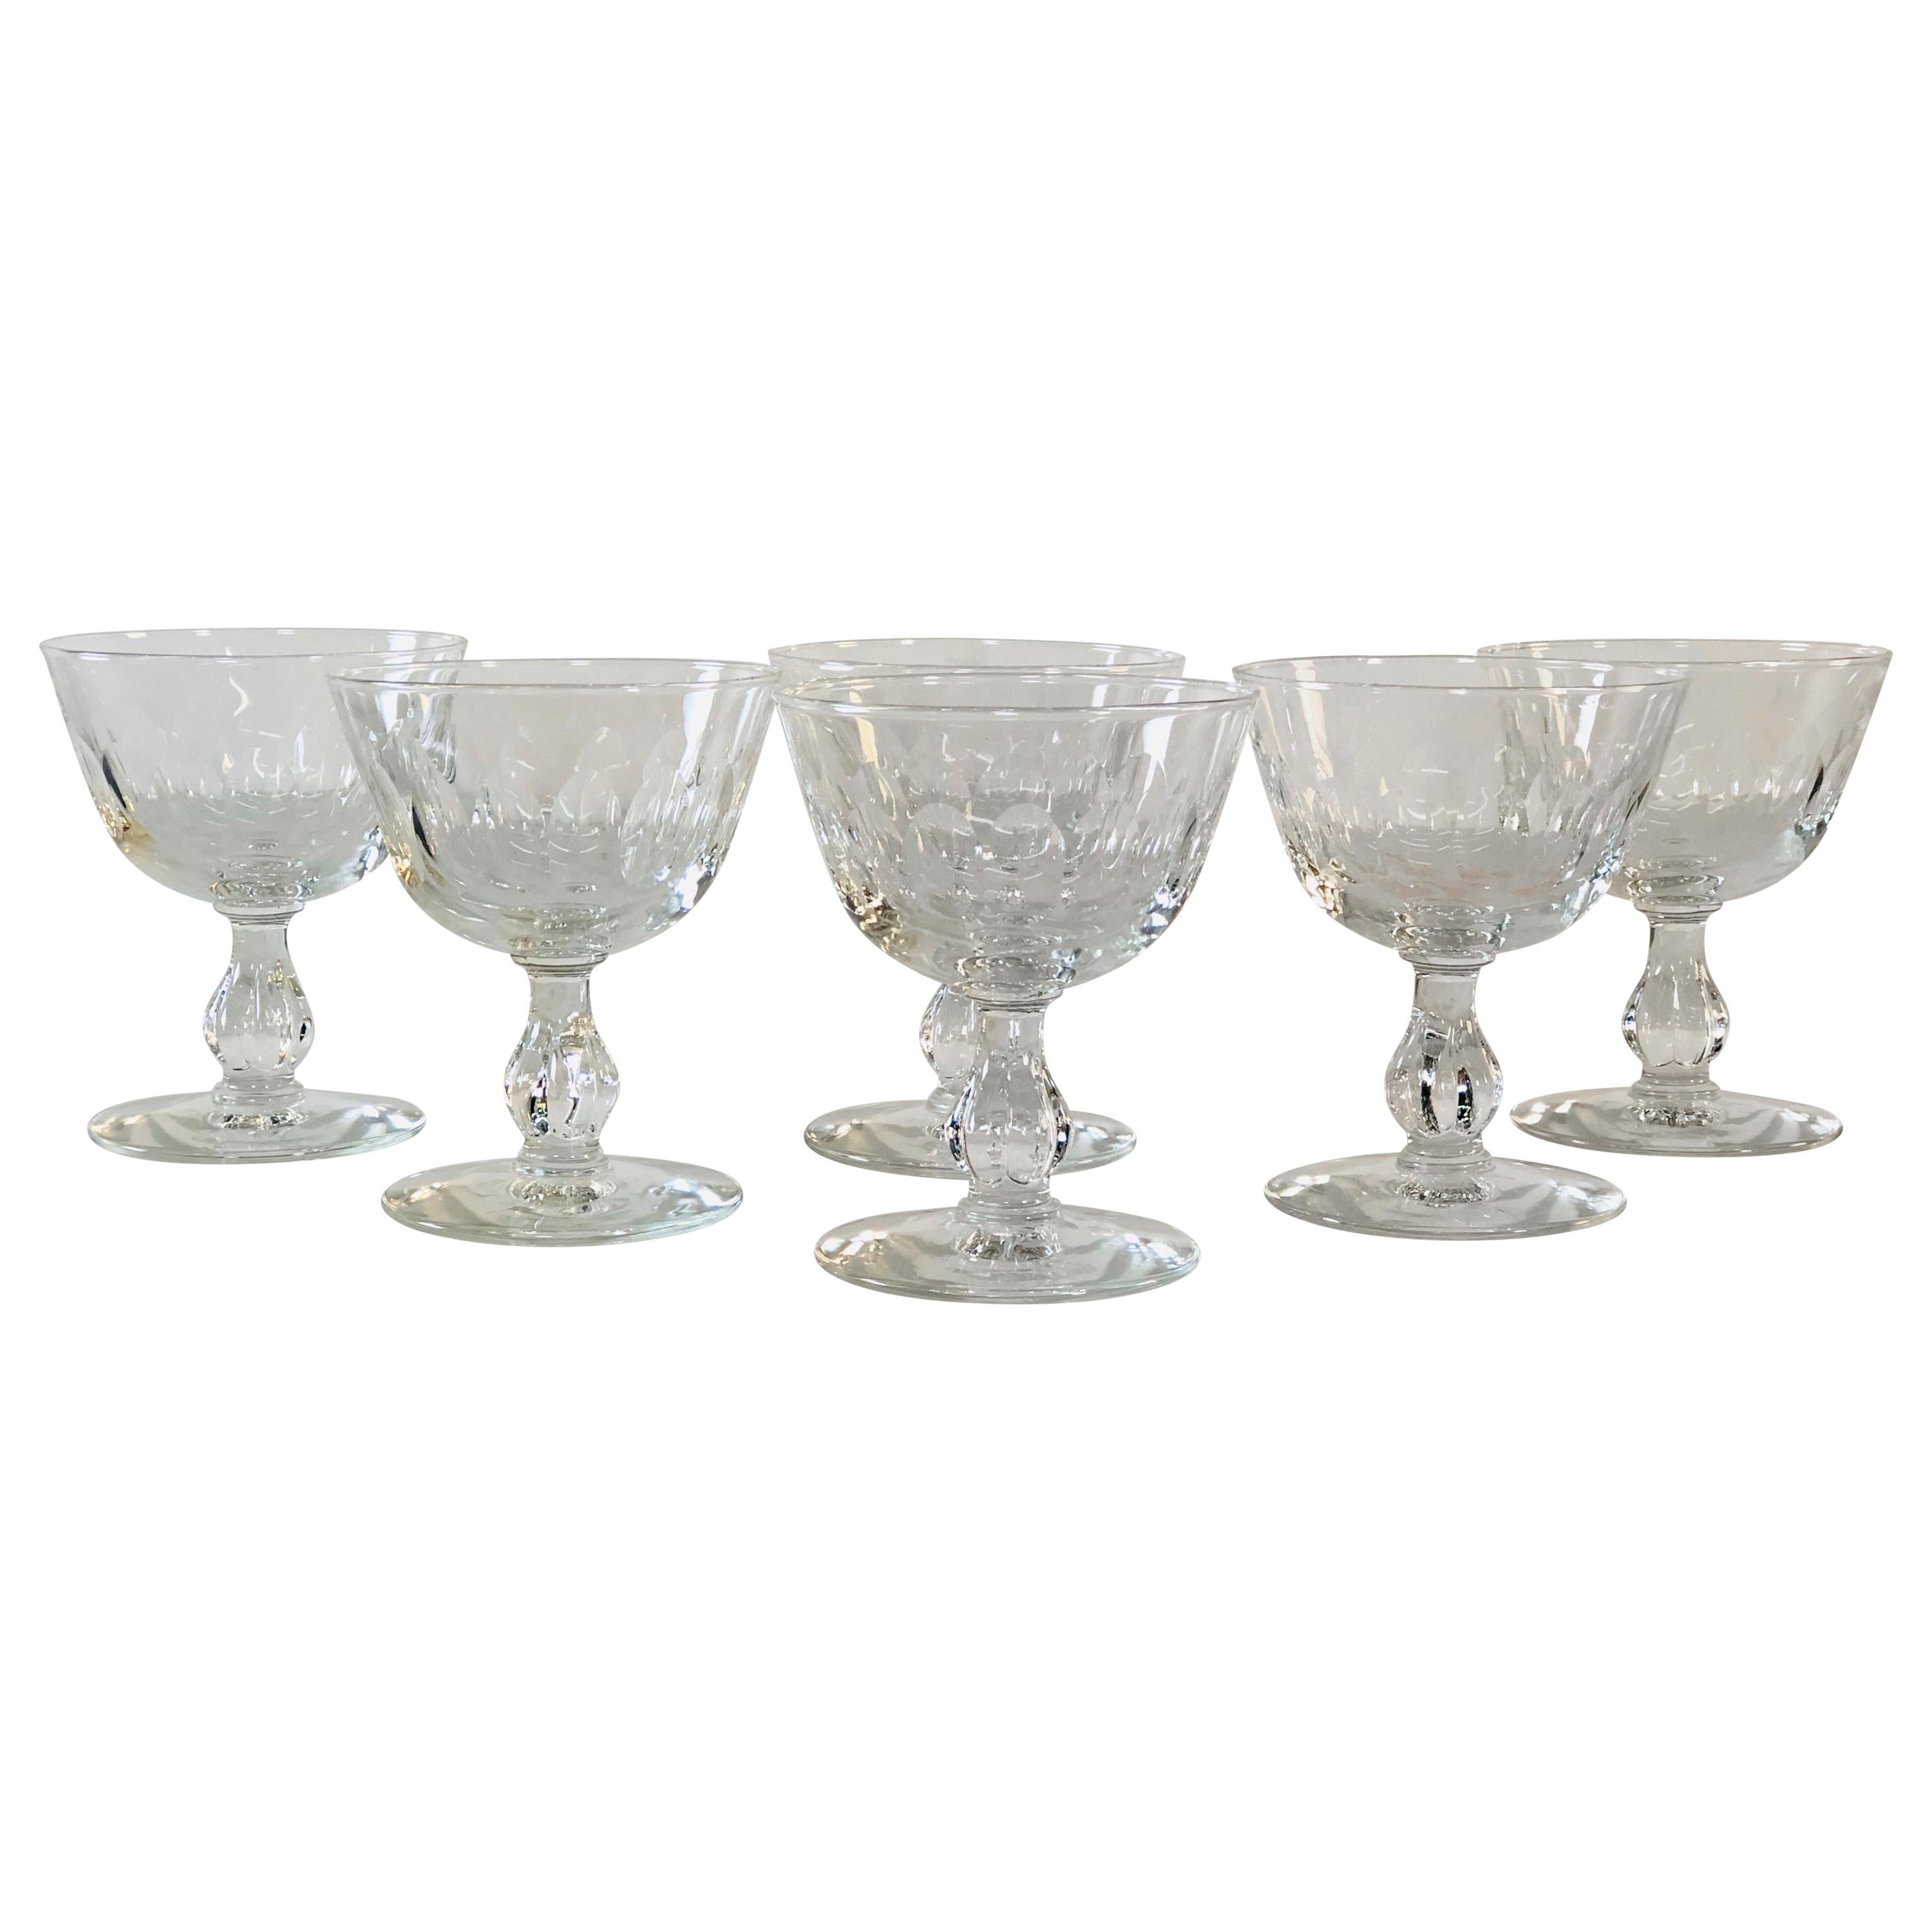 1950s Mitred Glass Coupe Stems, Set of 6